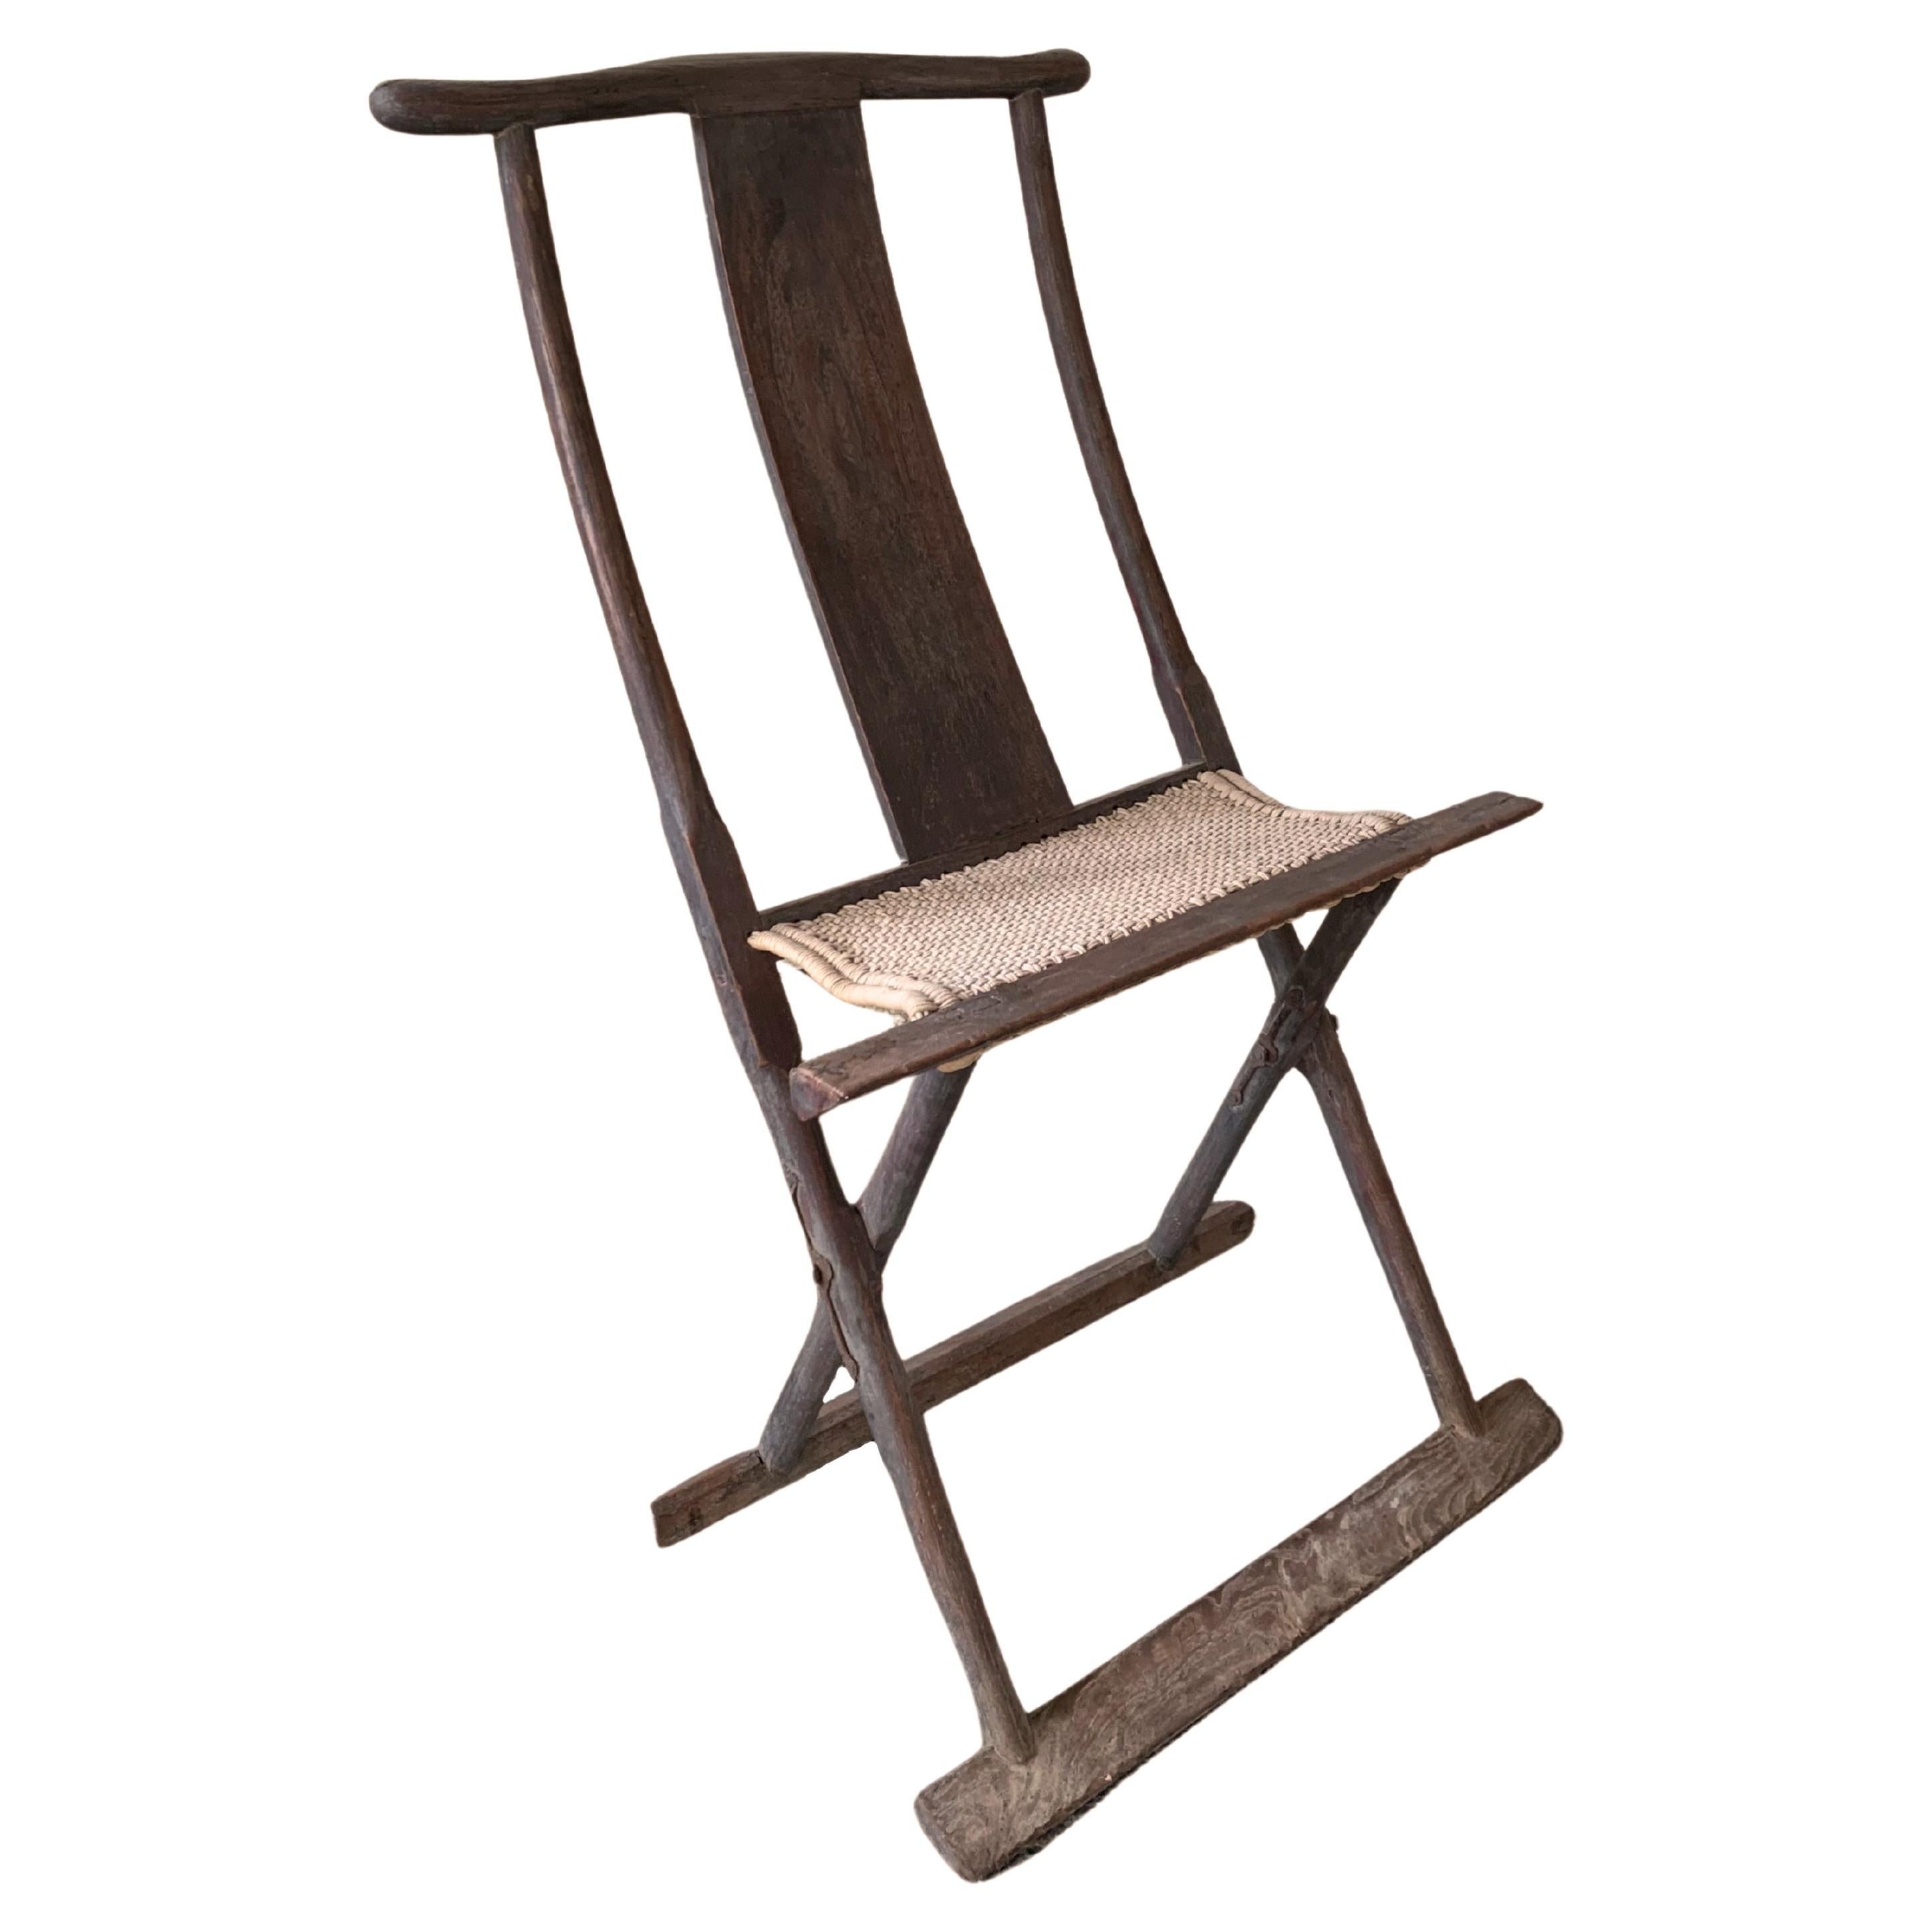 Antique Chinese Folding Chair with Woven Fabric Seat, c. 1900